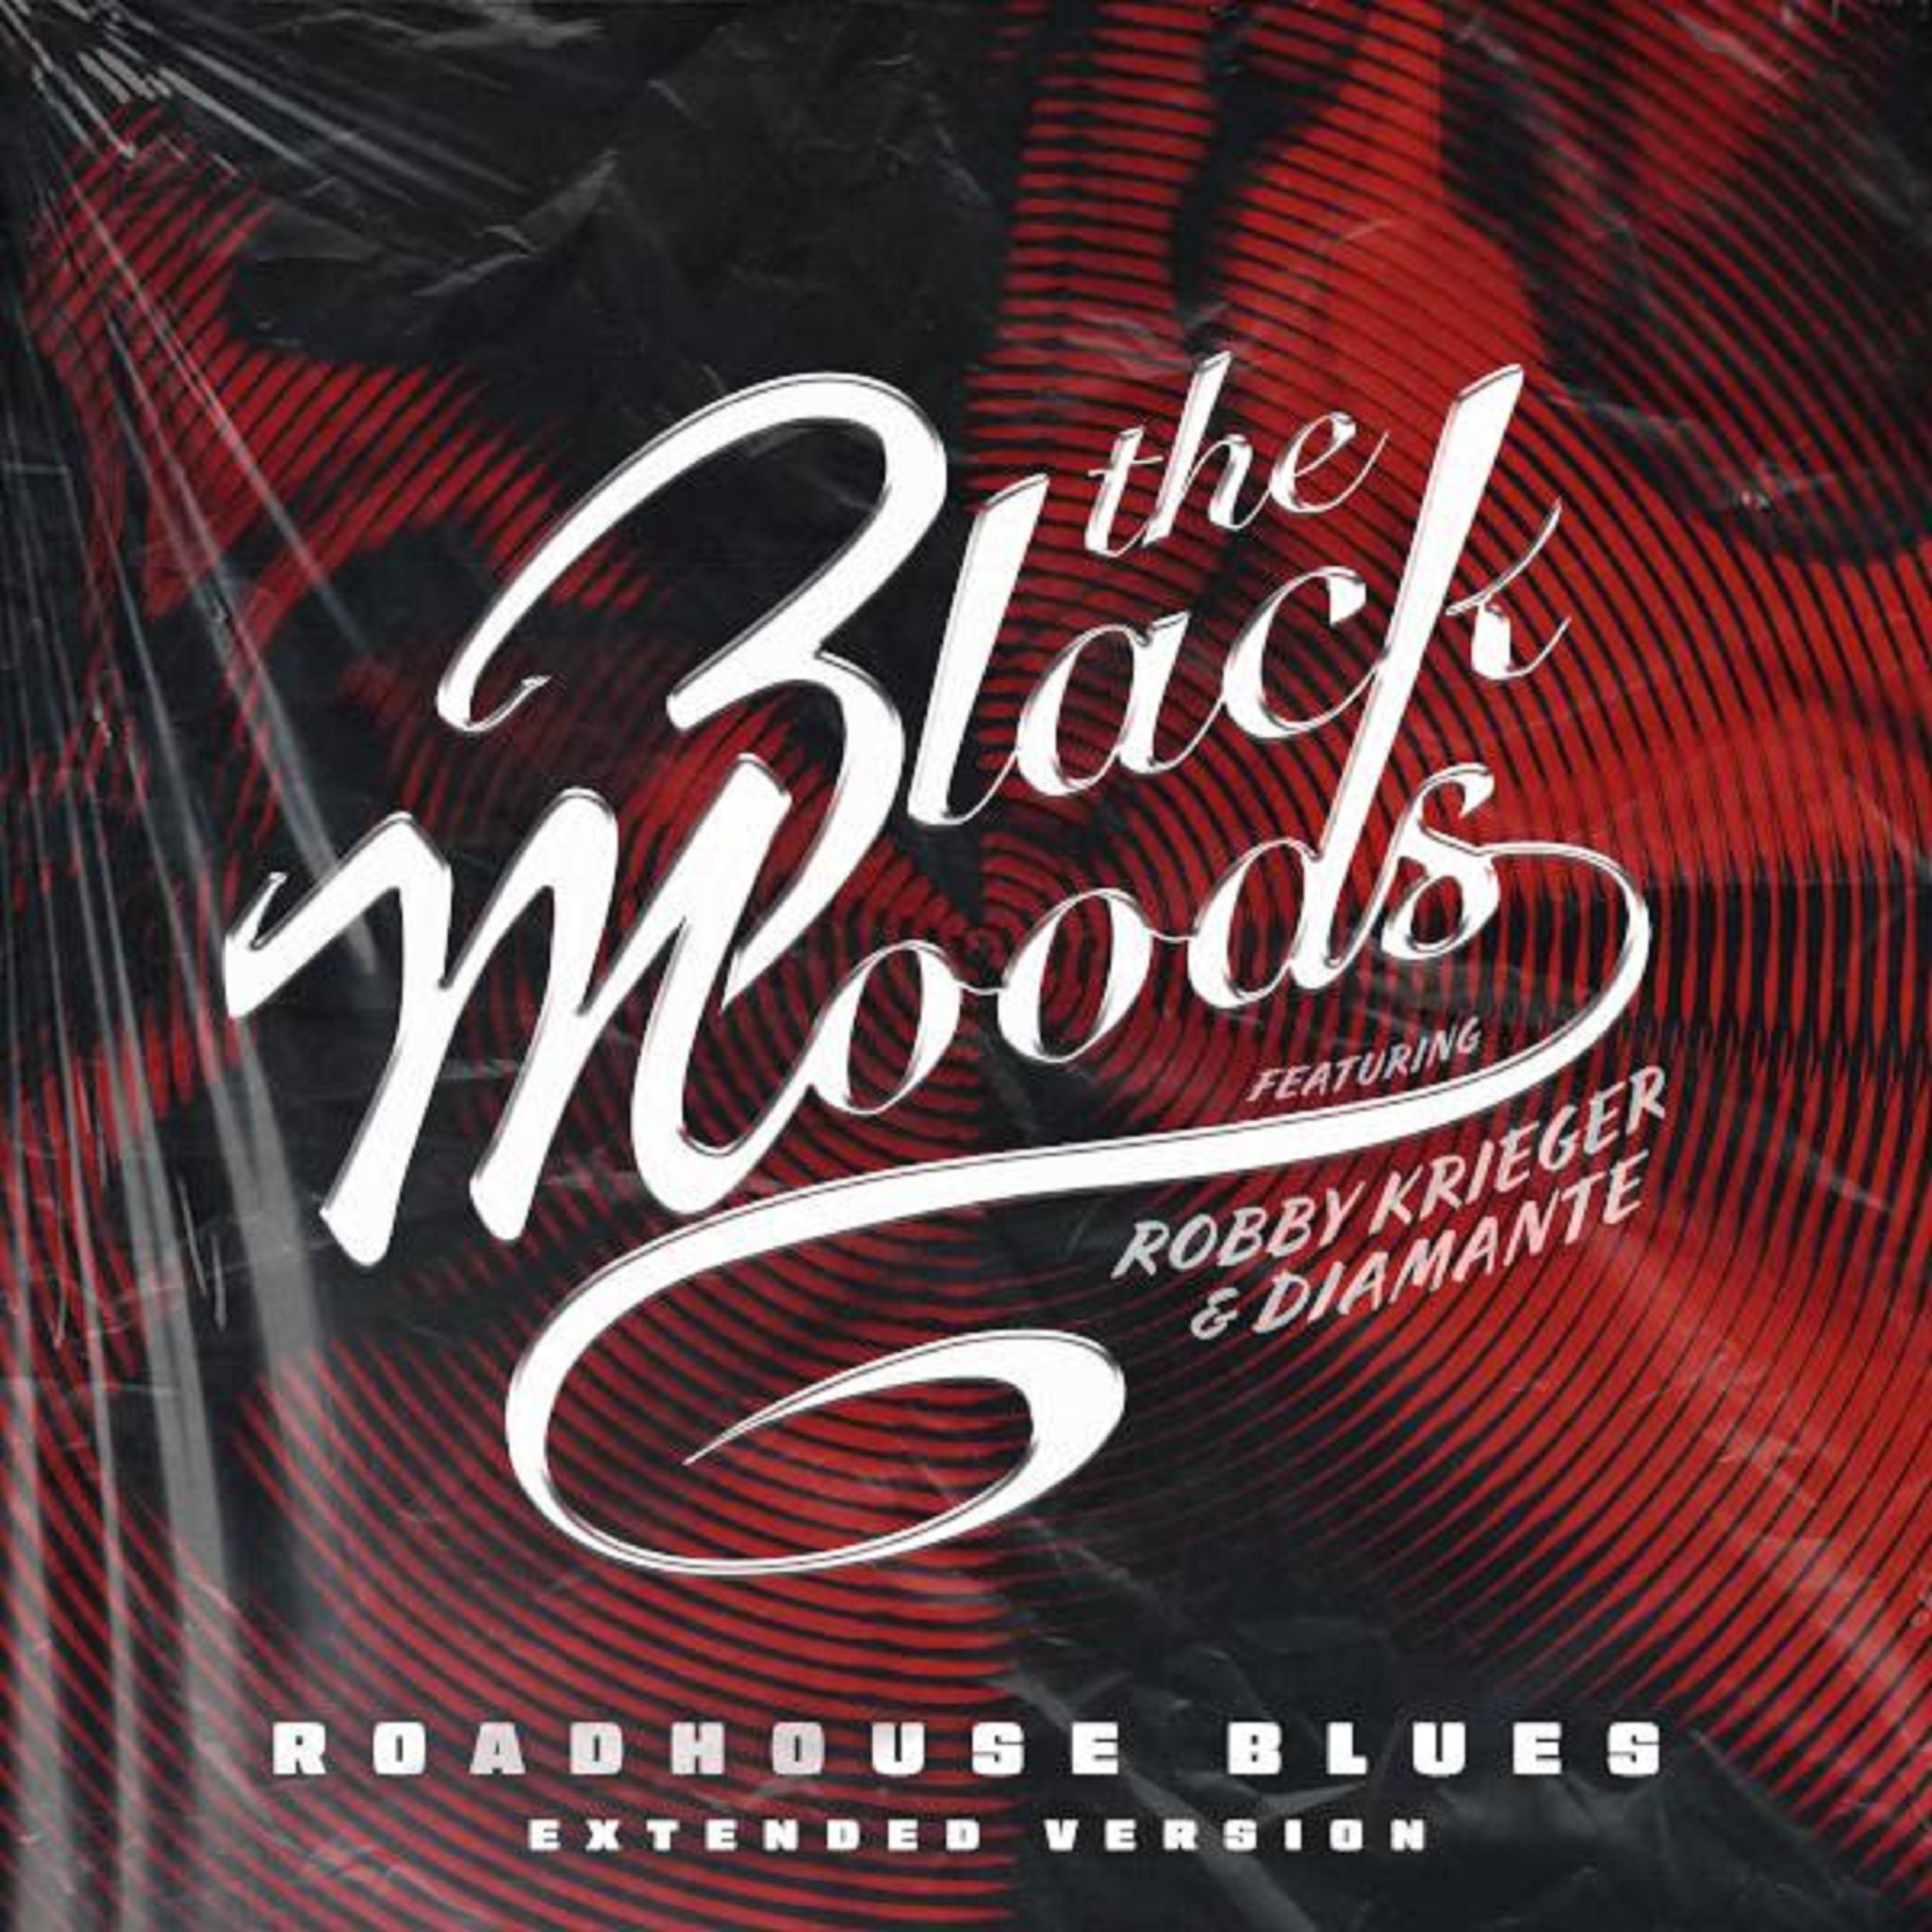 THE BLACK MOODS Share Extended Version of "Roadhouse Blues" Feat. Robby Krieger of The Doors & Diamante